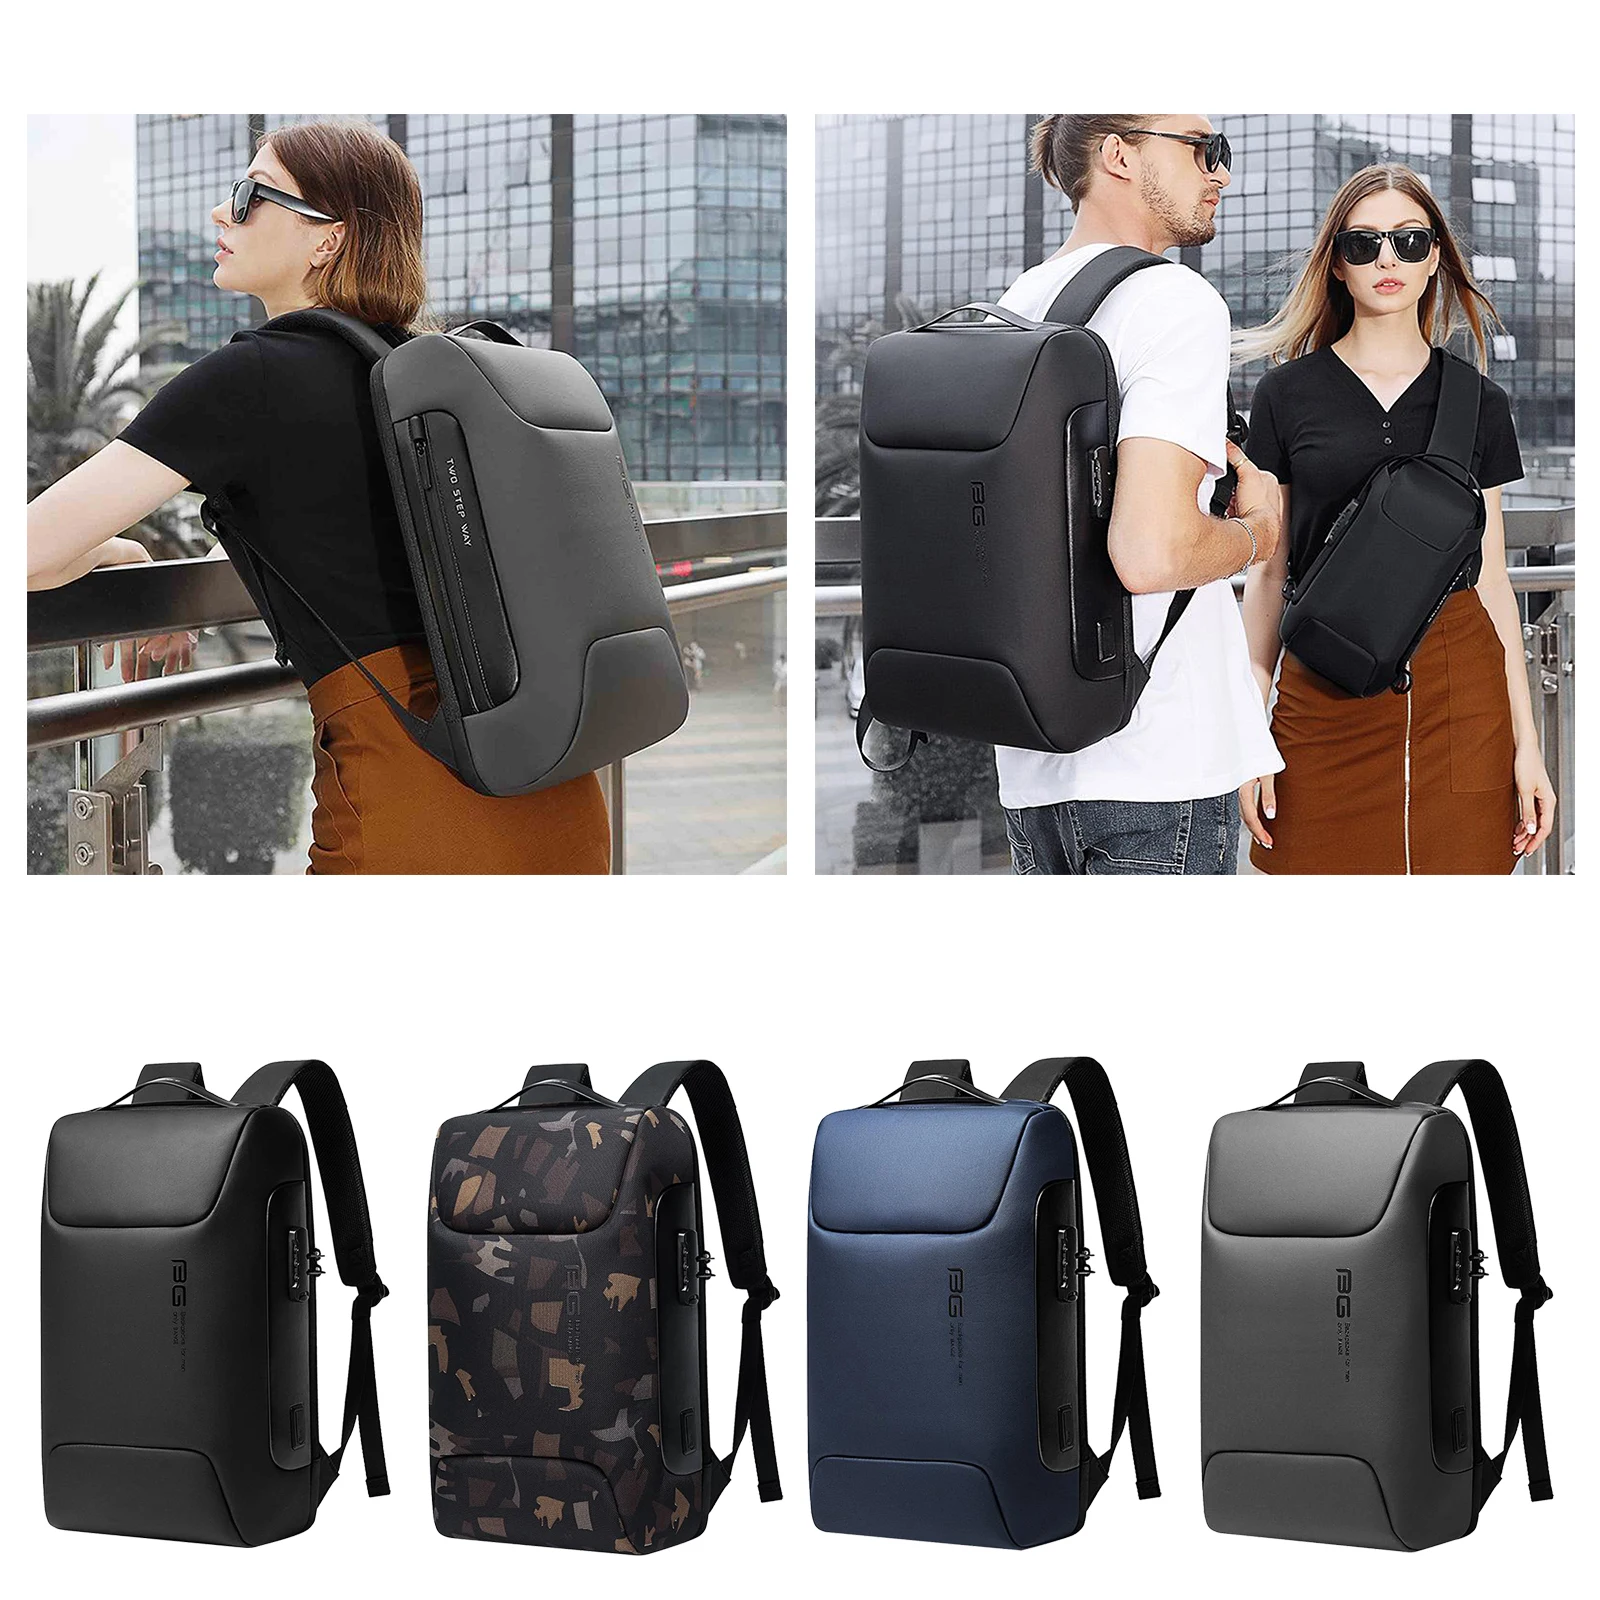 High Quality Laptop Backpack For Men Teenager Computer Travel Business Daypacks Waterproof Daily Short Trip Shoulder Bags